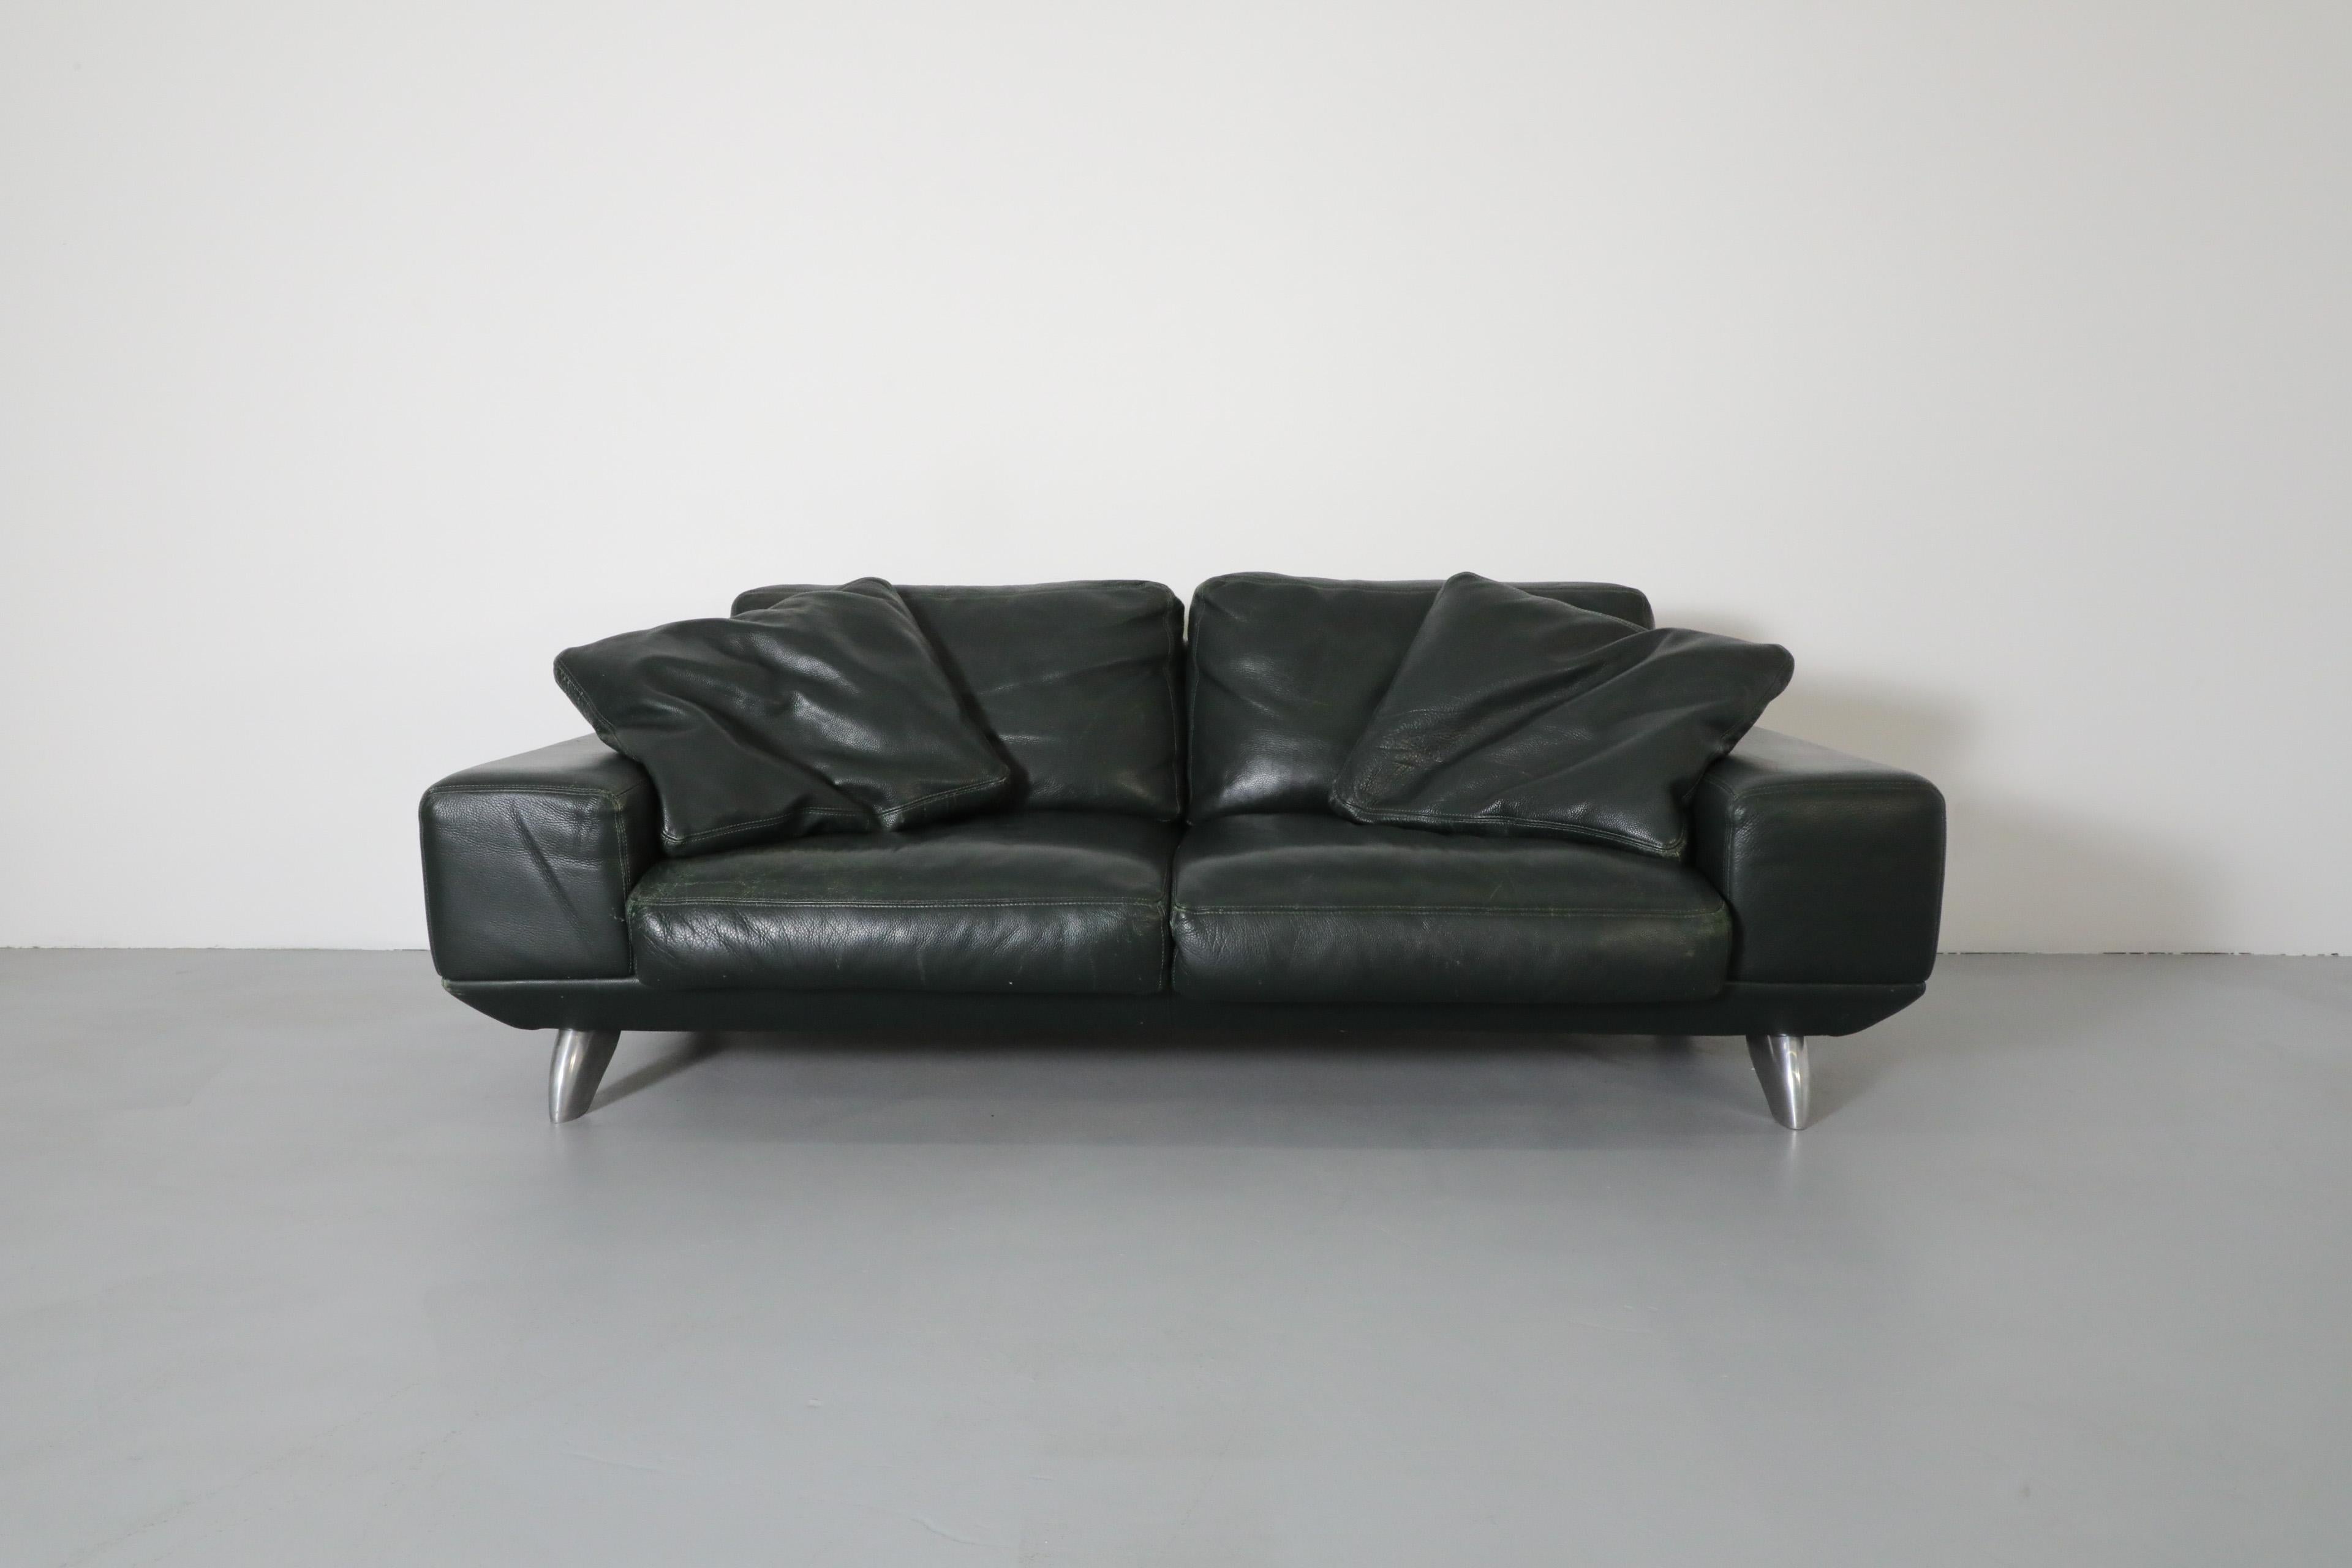 1980's MOD dark green leather sofa by Molinari. An attractive loungy loveseat with oversized armrests and molded chrome feet. This sofa is in original condition with some leather indentation and visible wear consistent with its age and regular use.